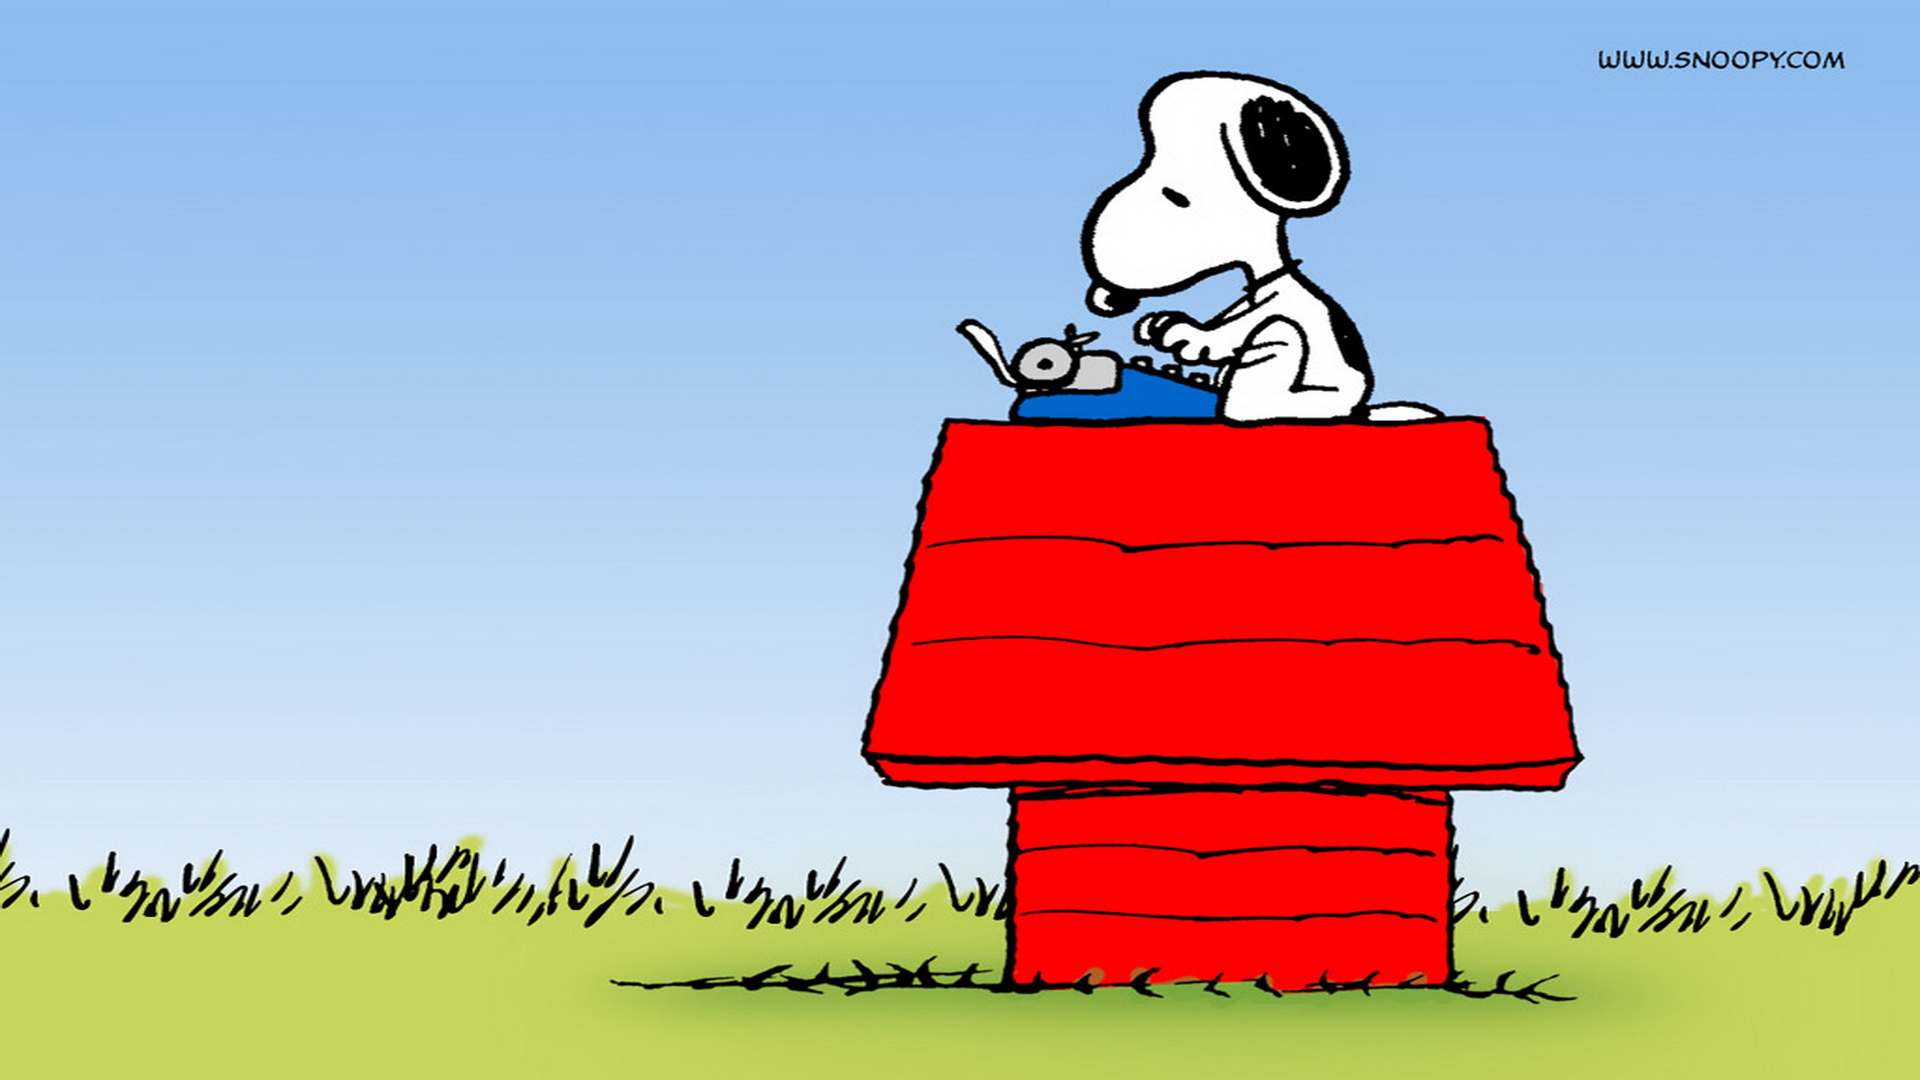 Snoopy Wallpapers HD A3